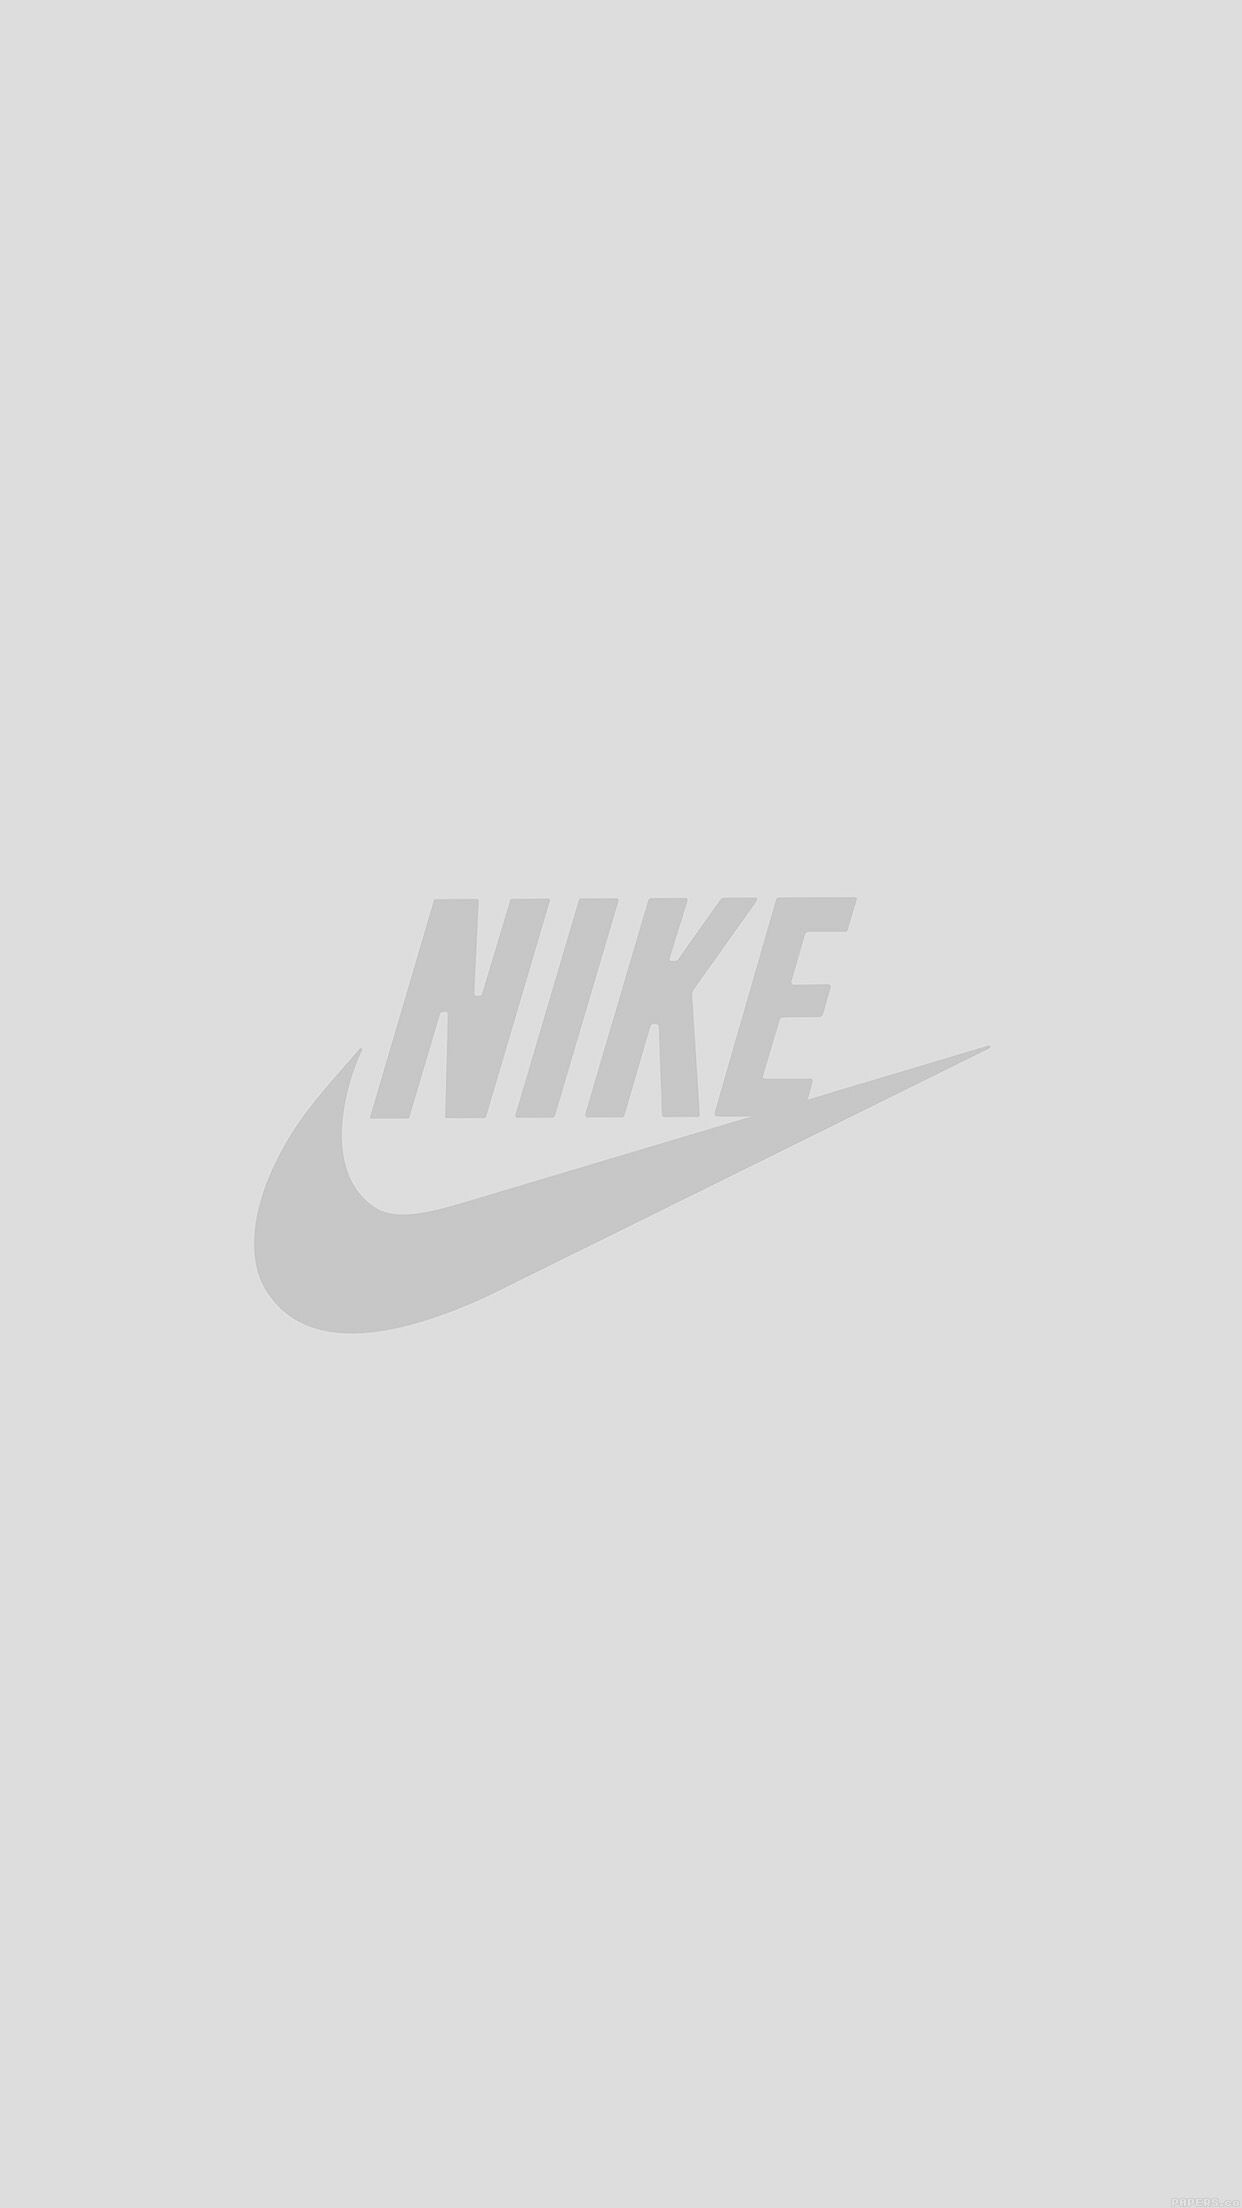 Nike: Athletic footwear products, Manufacturer, founded on January 25, 1964. 1250x2210 HD Background.